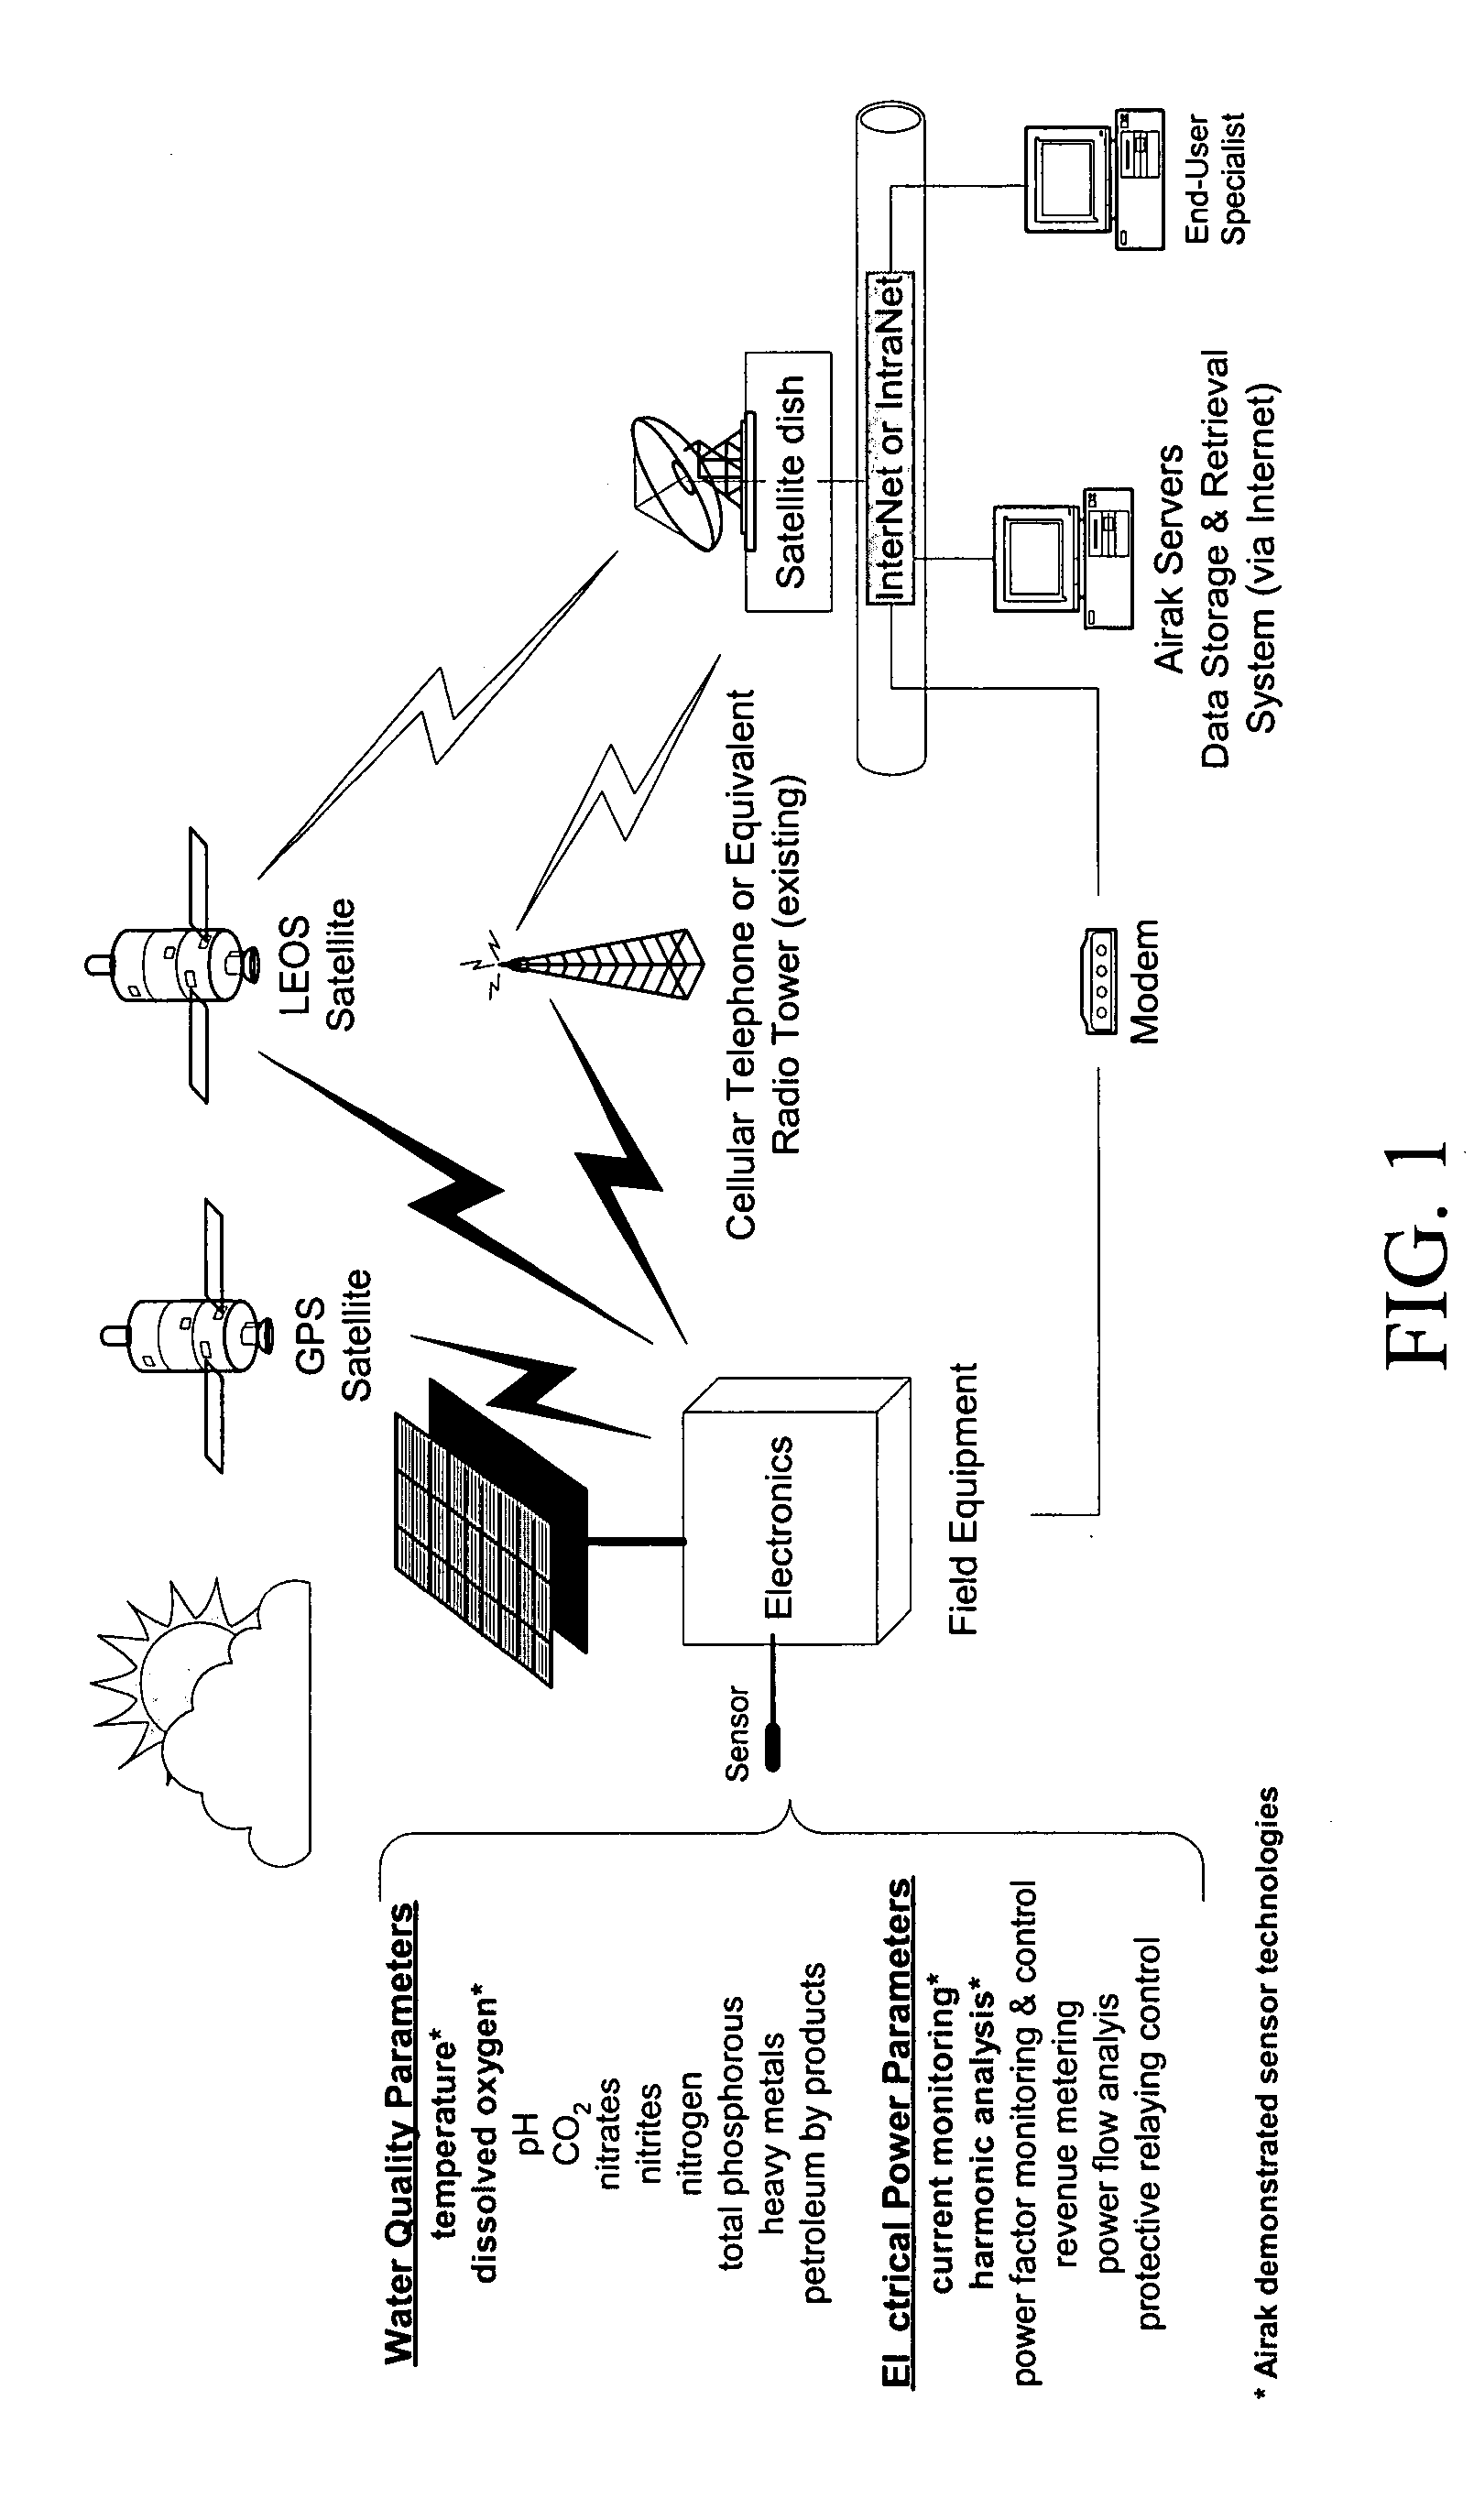 System and method for distributed monitoring of surroundings using telemetry of data from remote sensors